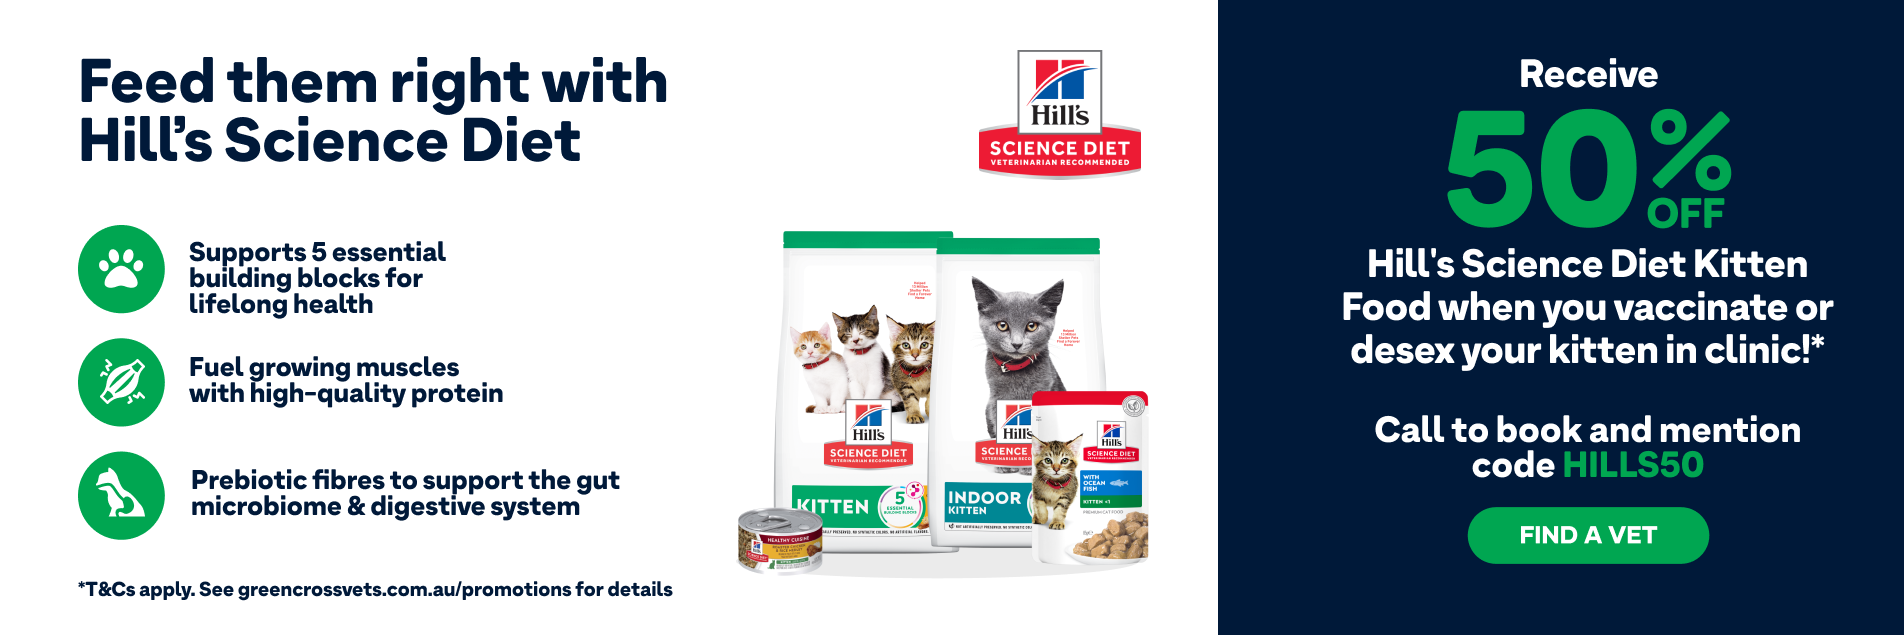 50% off Hill's Science Diet Kitten Food when you vaccinate or desex your kitten! Contact us